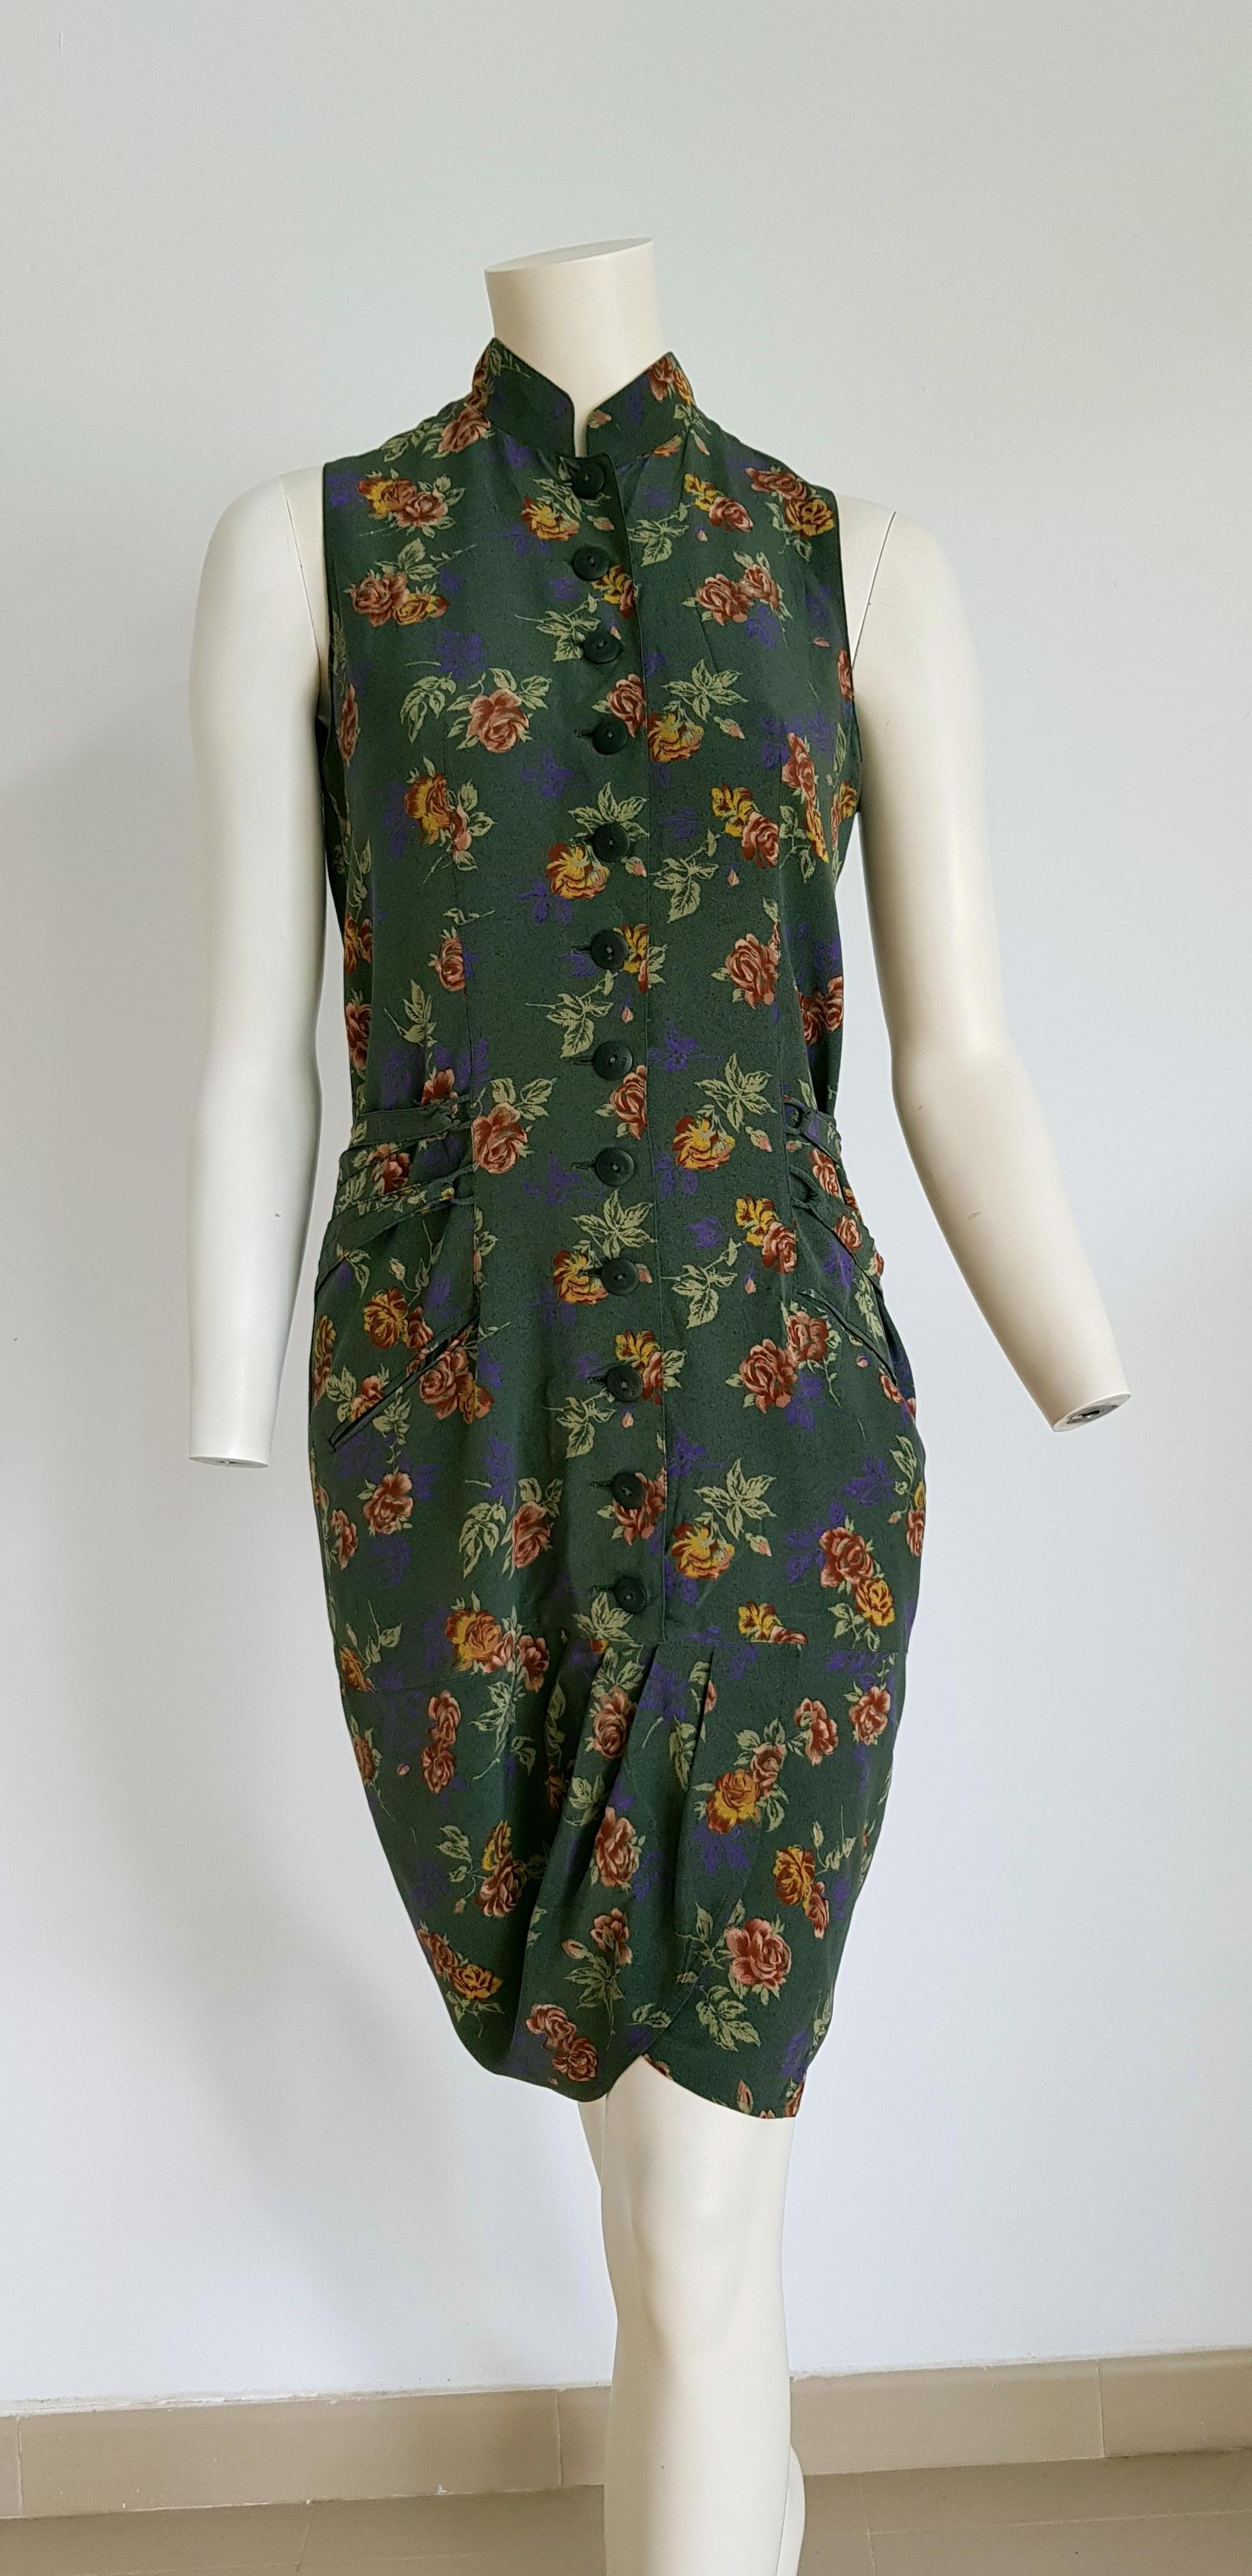 ROCCOBAROCCO Haute Couture, green on flowers theme, ribbons on the back, silk dress - Unworn, New.

SIZE: equivalent to about Small / Medium, please review approx measurements as follows in cm: lenght 101, chest underarm to underarm 48, bust